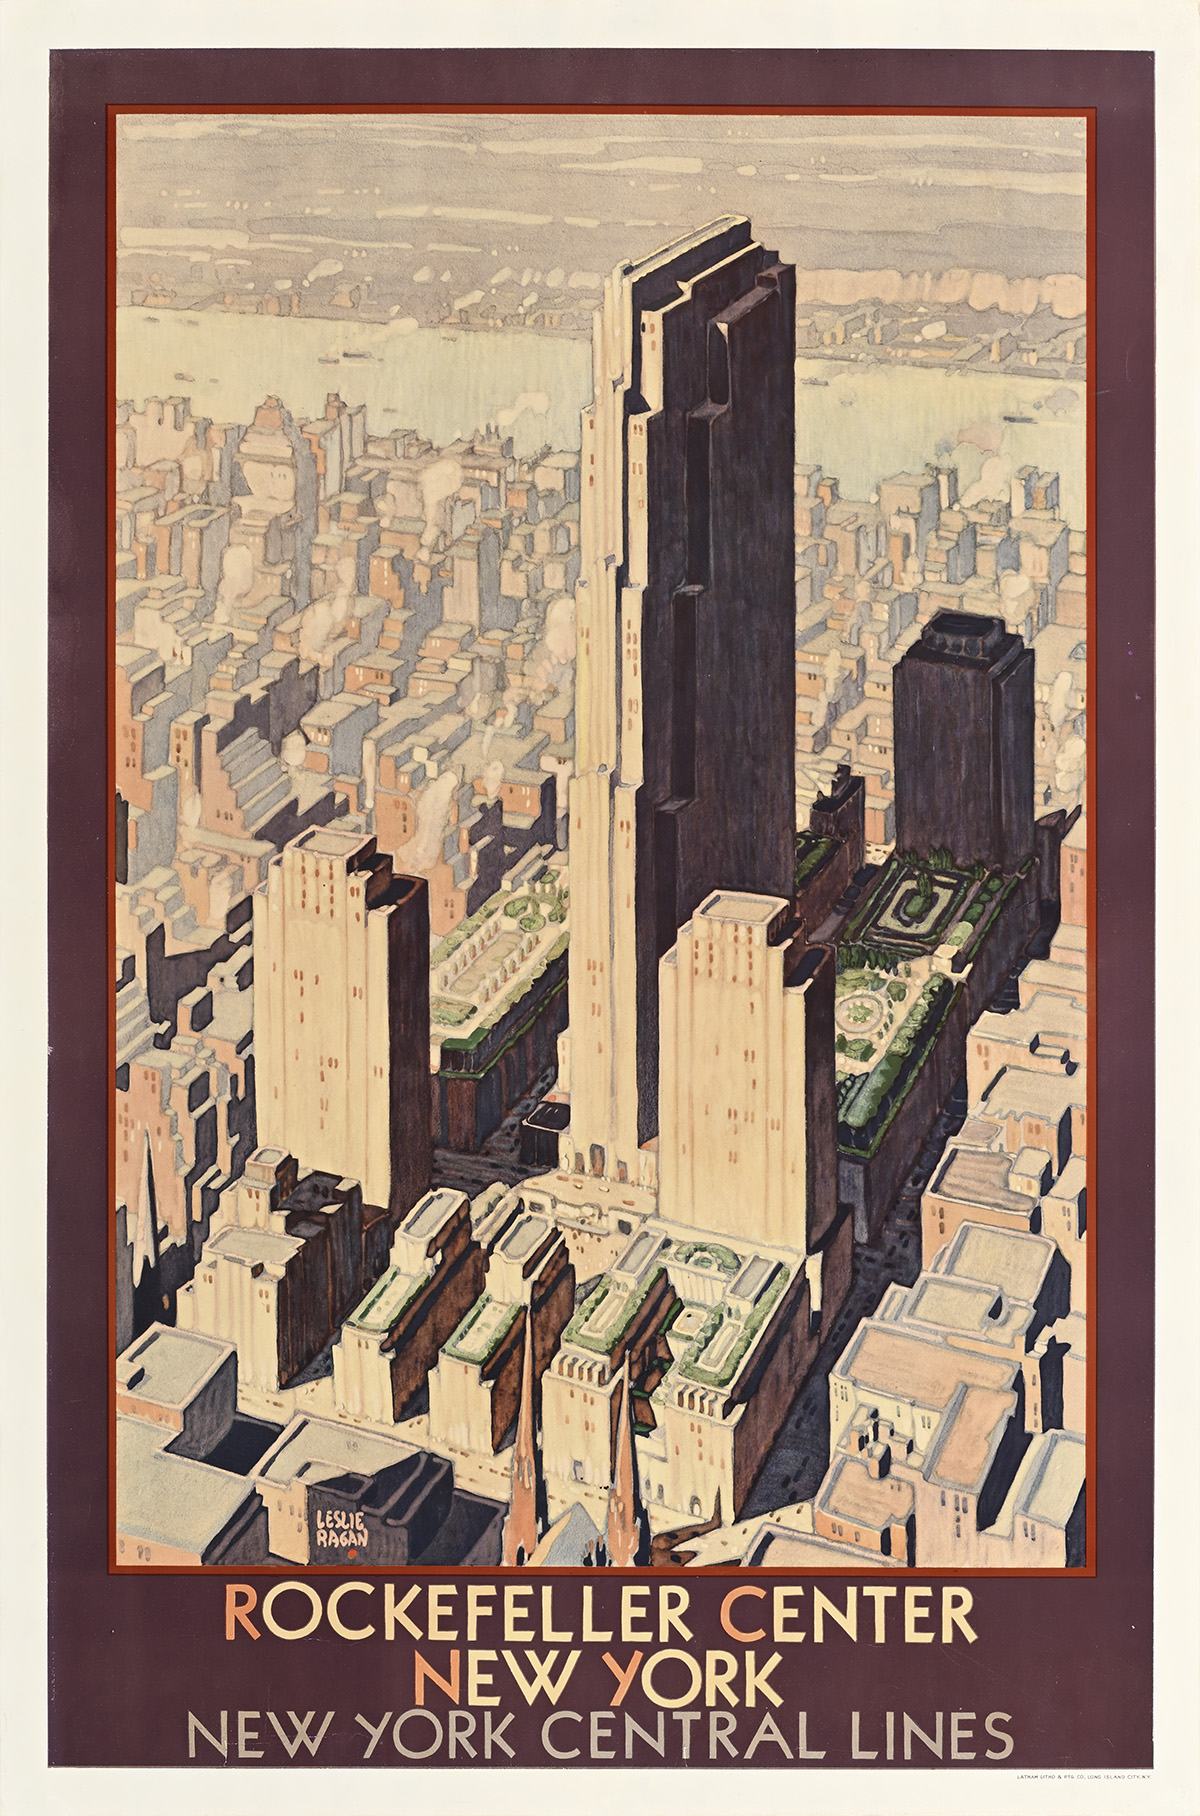 A poster of a bird's-eye view of a regtangular shaped building towering over surrounding buildings.